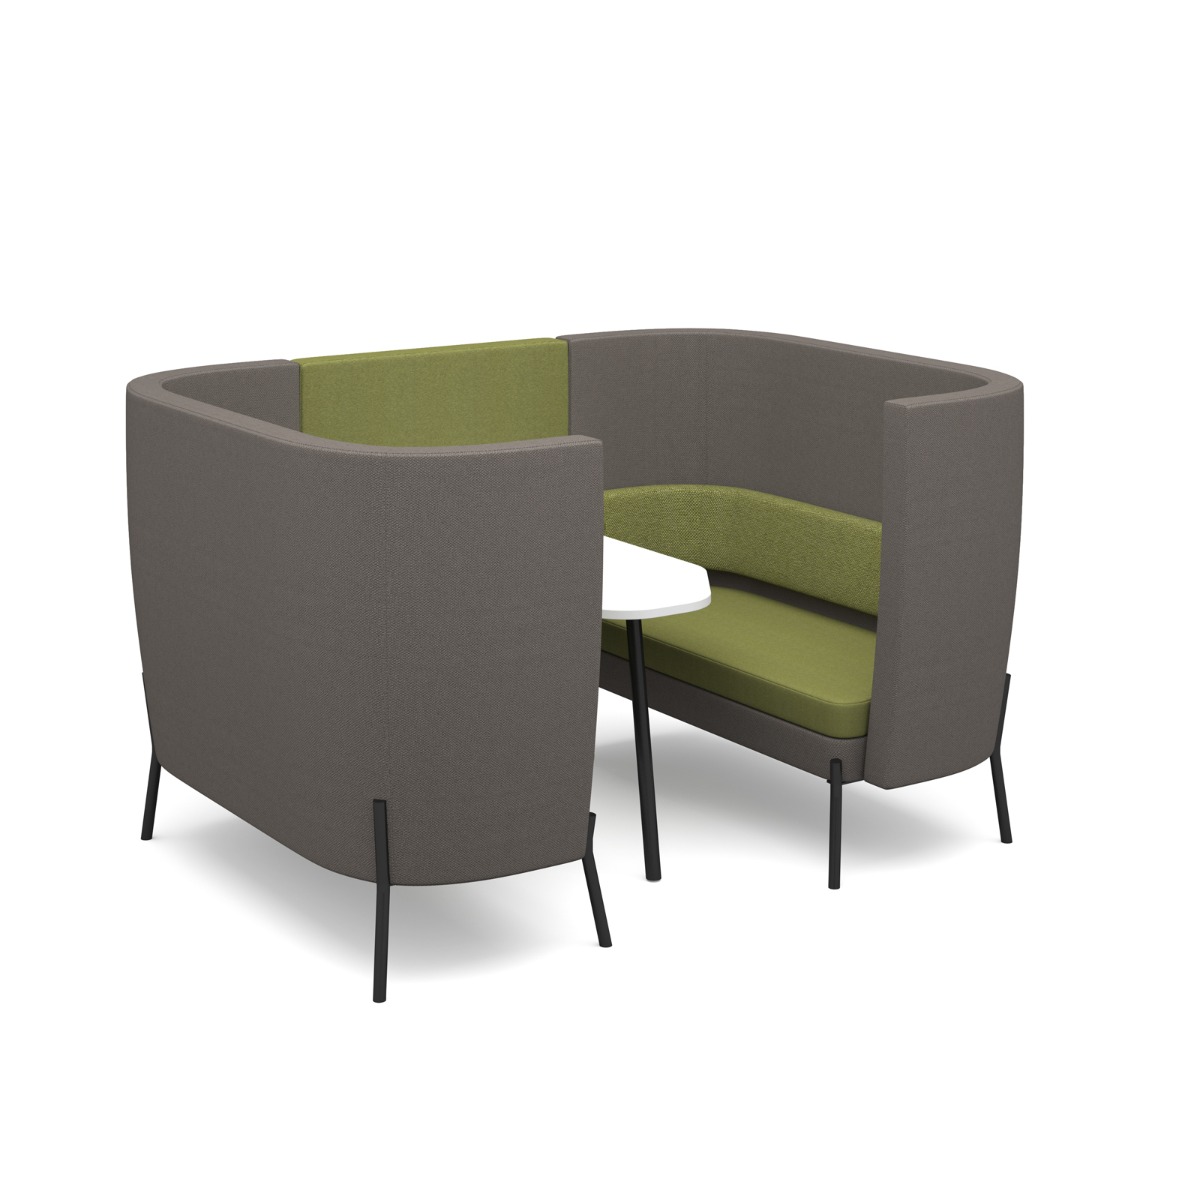 Dams Tilly 4 Seater High Back Breakout Meeting Pod with Table 